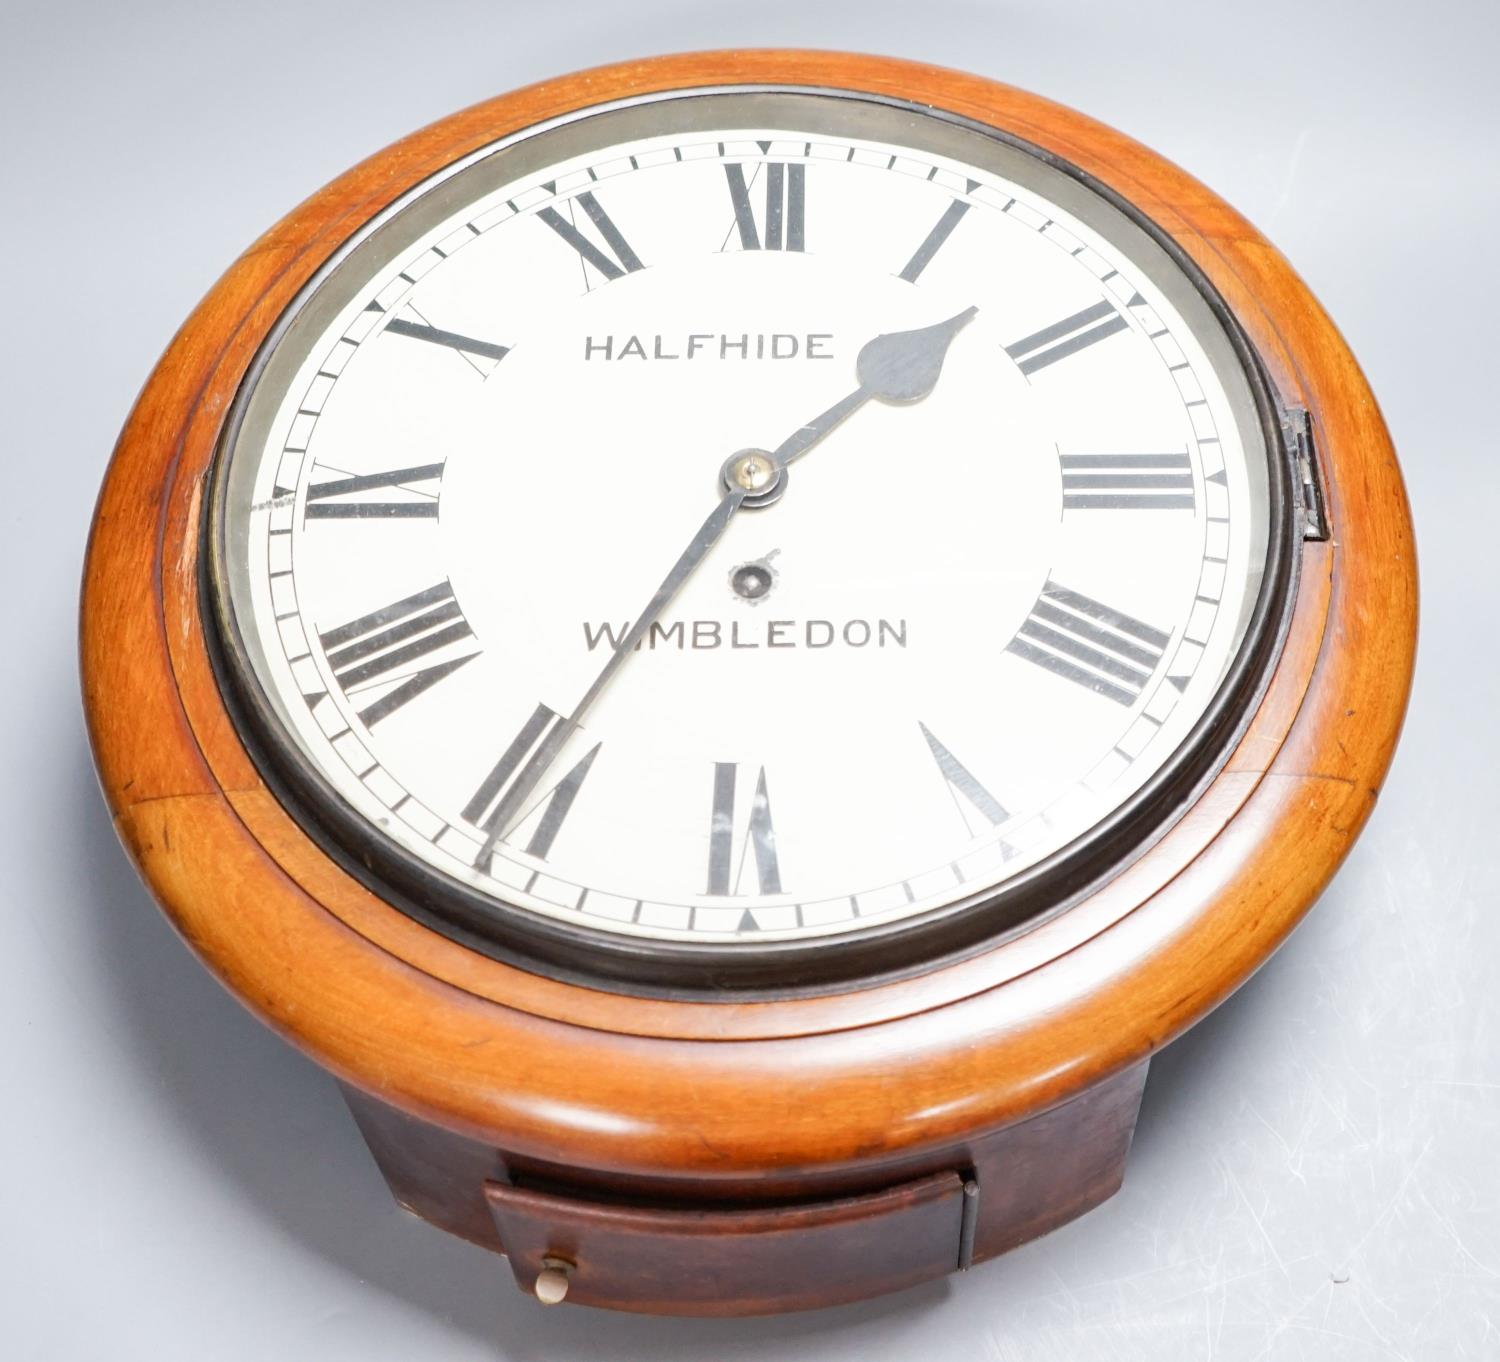 An early 20th century mahogany wall dial timepiece, Halfhide Wimbledon, German movement, 39.5 cm - Image 2 of 5